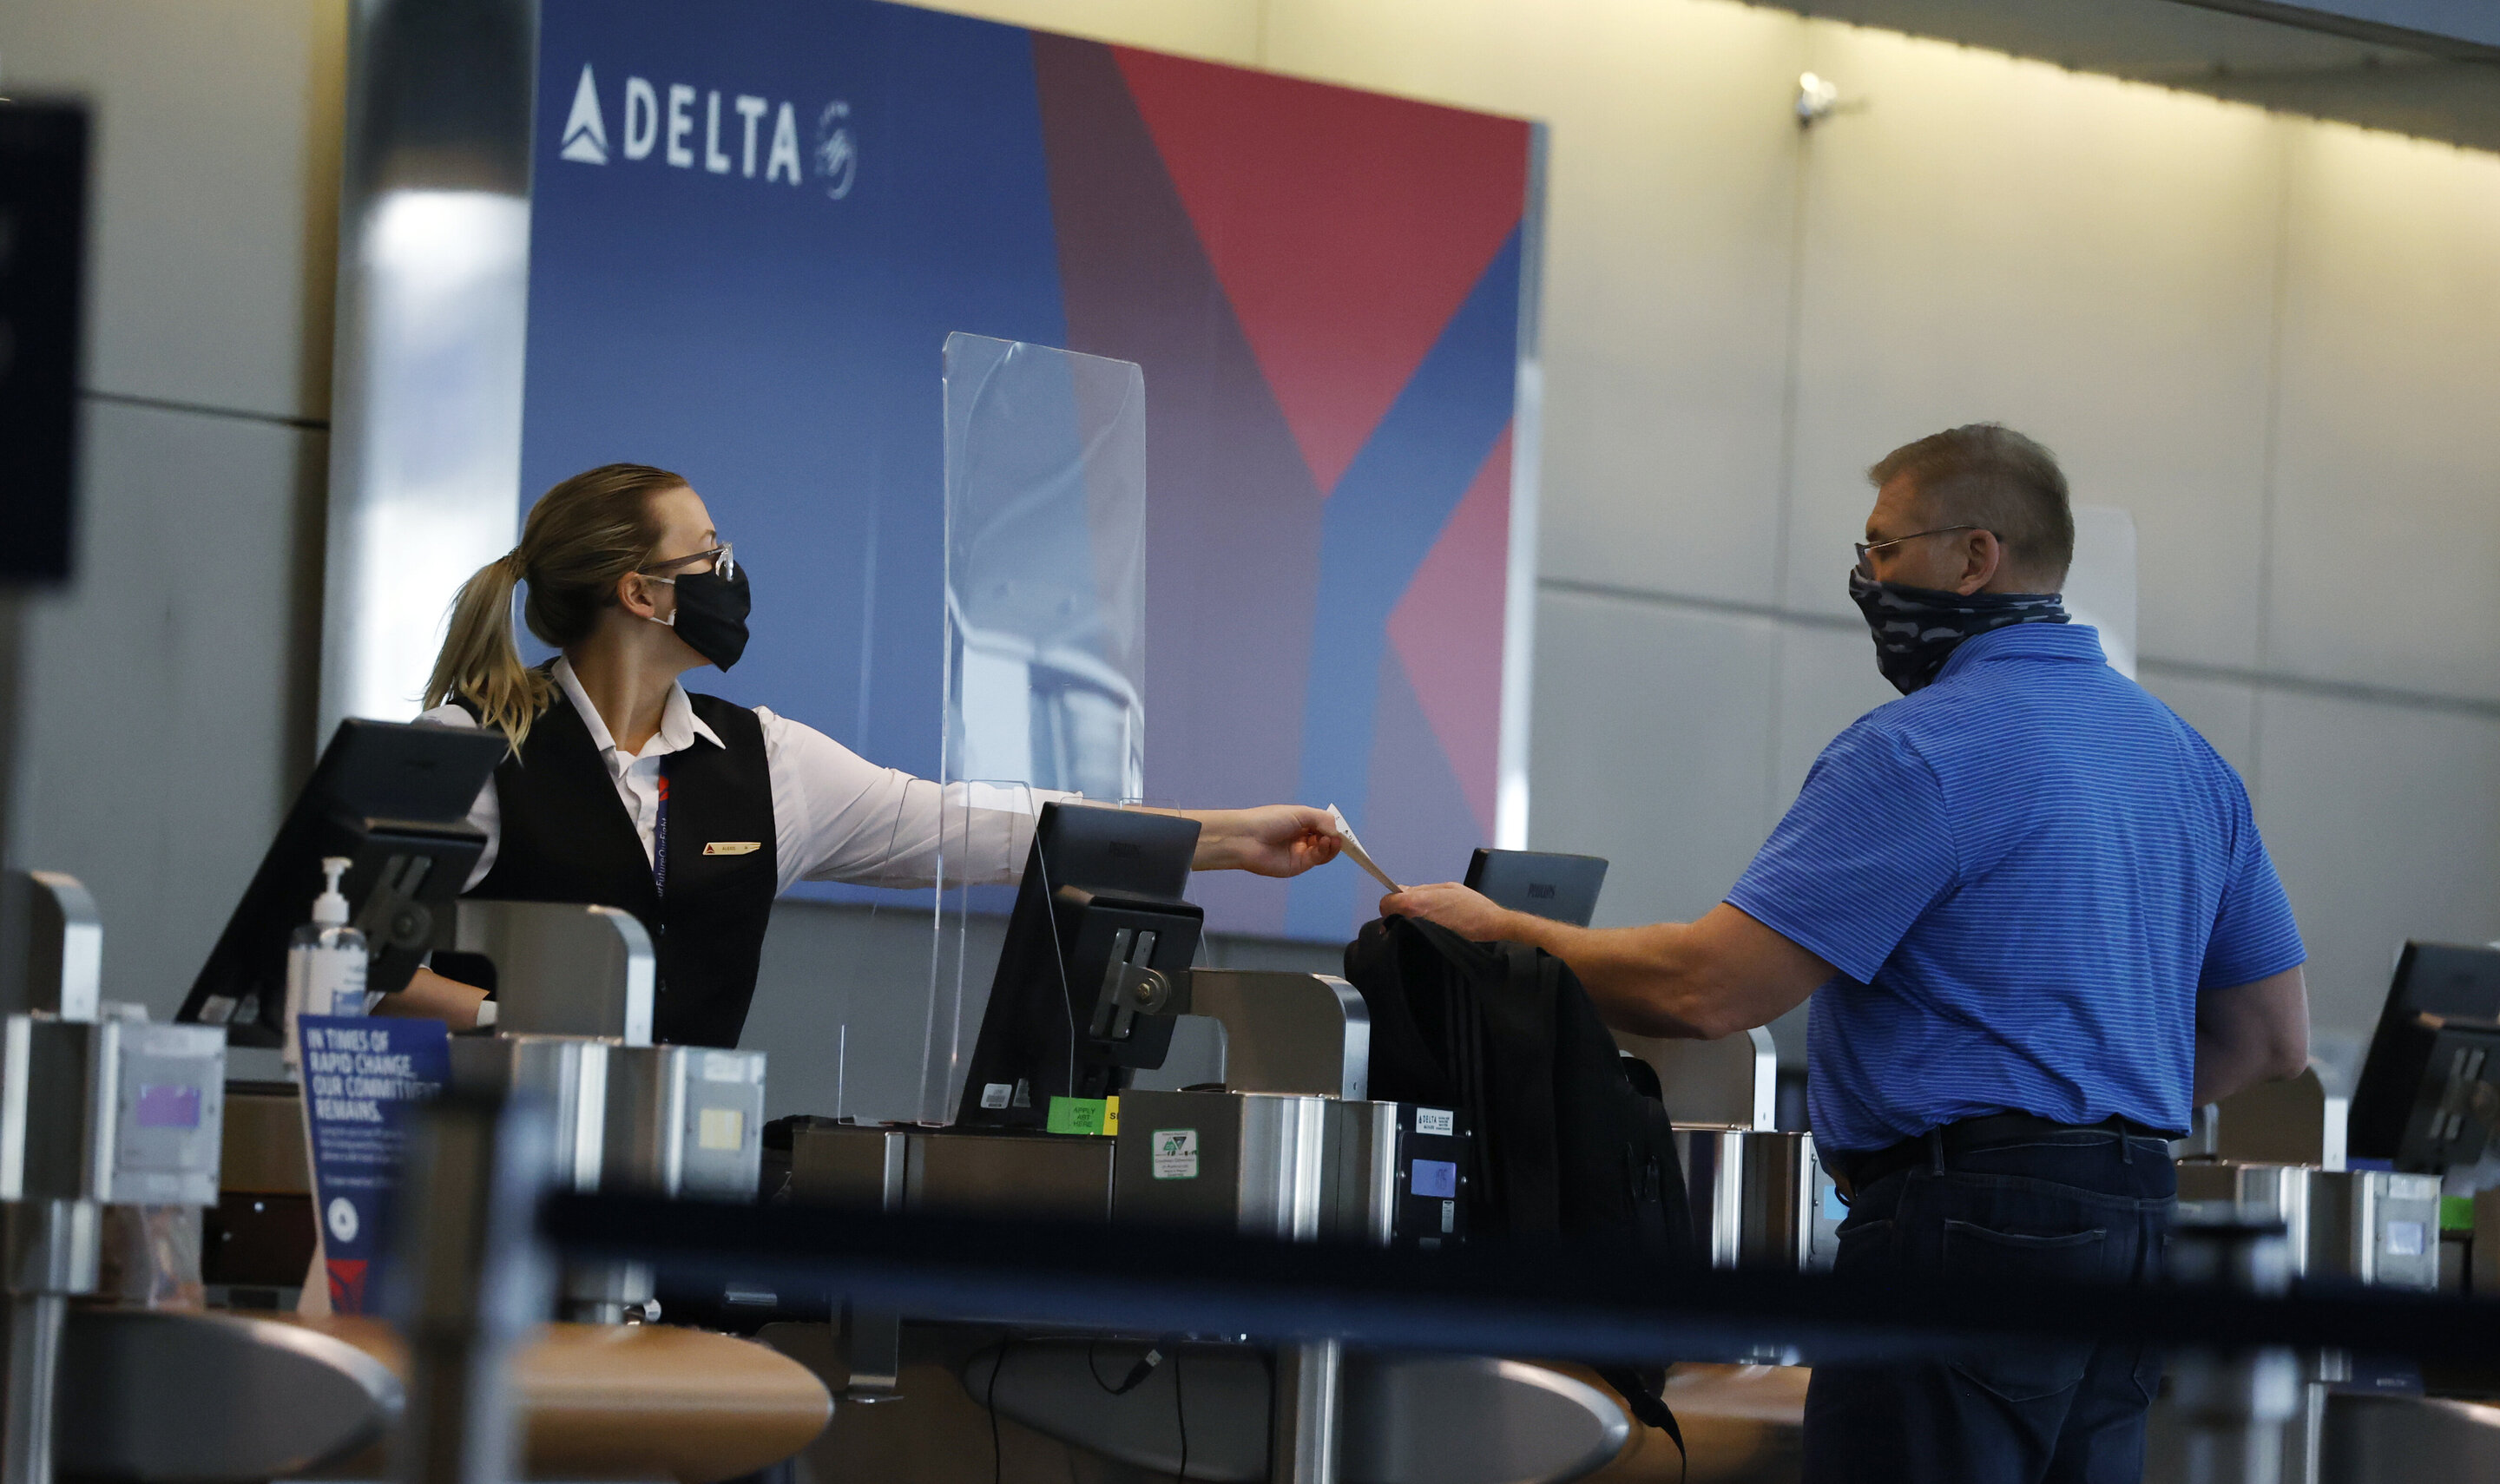 Delta latest airline to raise funds through loyalty program